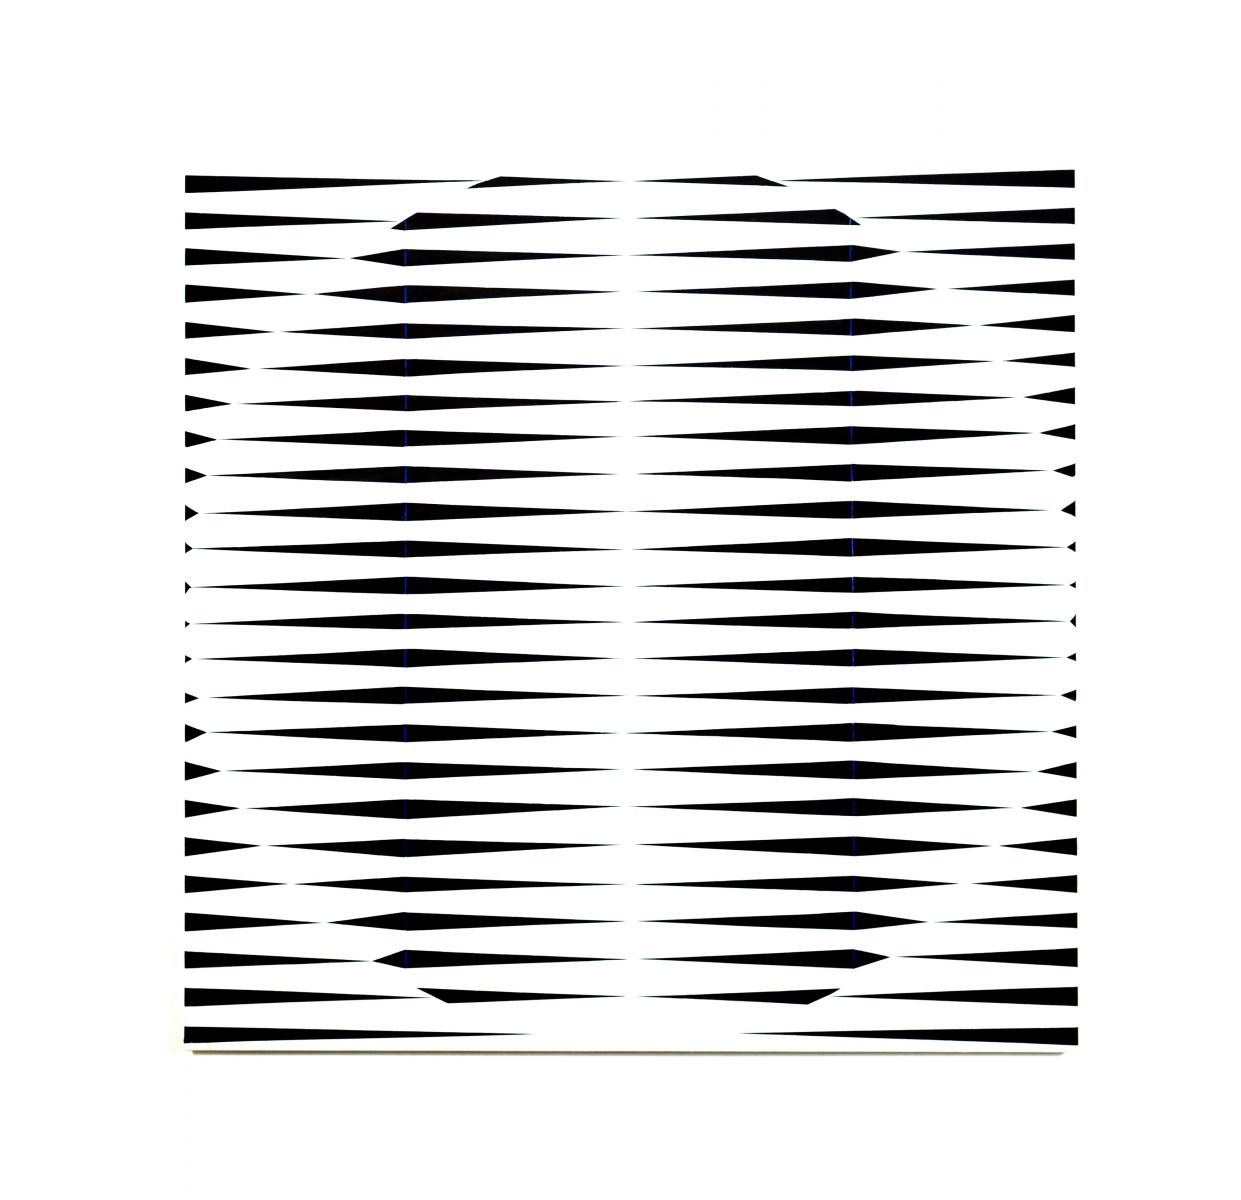 Christian Eder-Painting-space-white circle in white square-space-manhattan